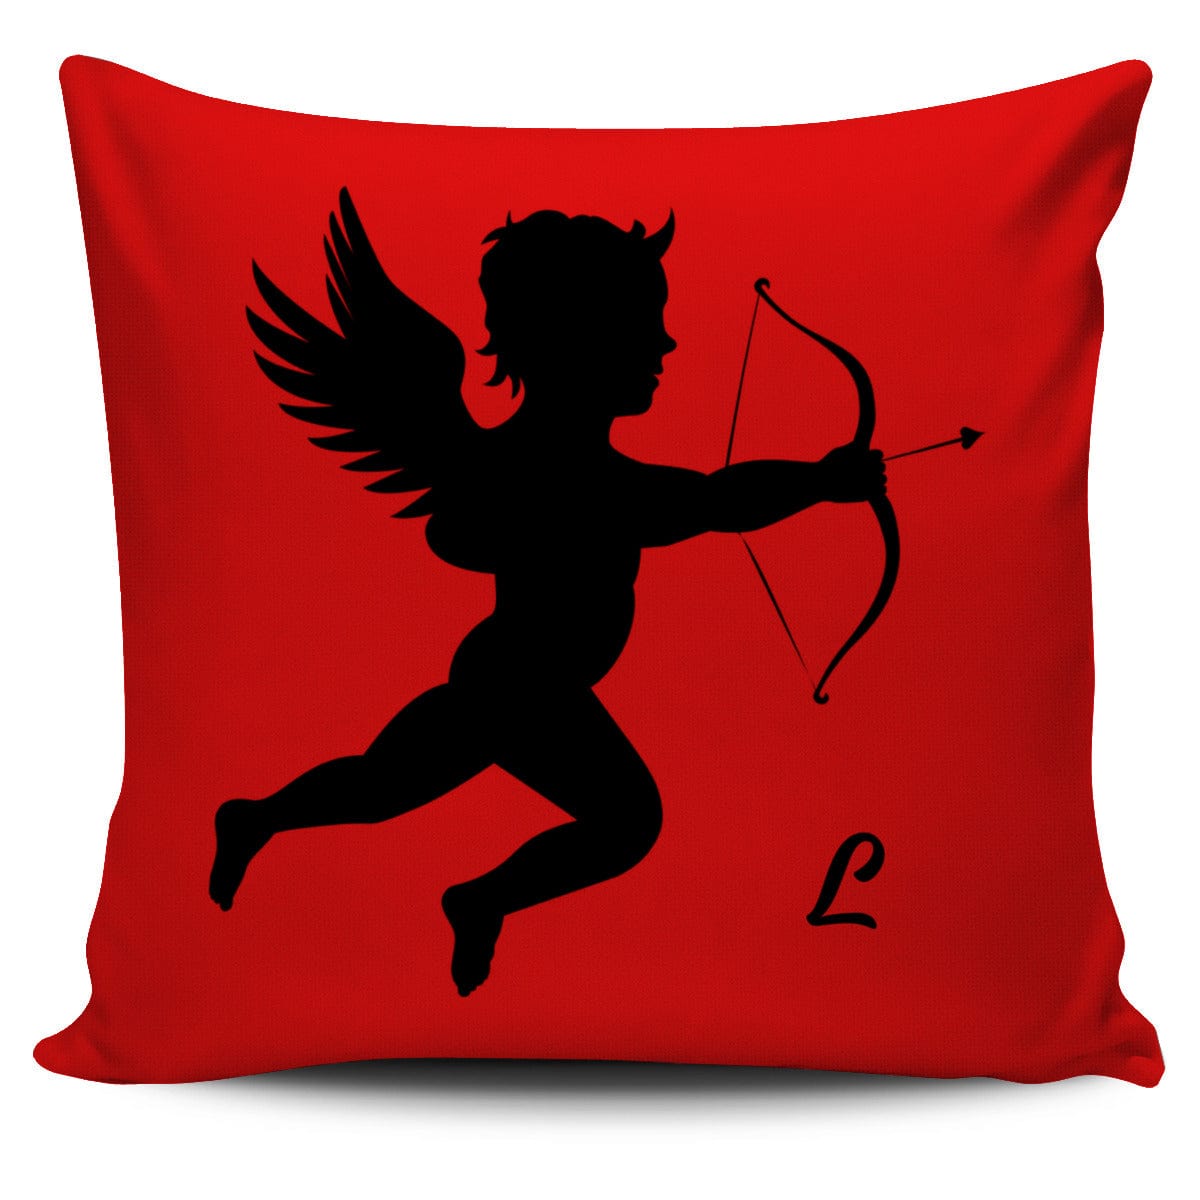 Pillow Covers - Cupid Love Pillow Set of Four - GiddyGoatStore